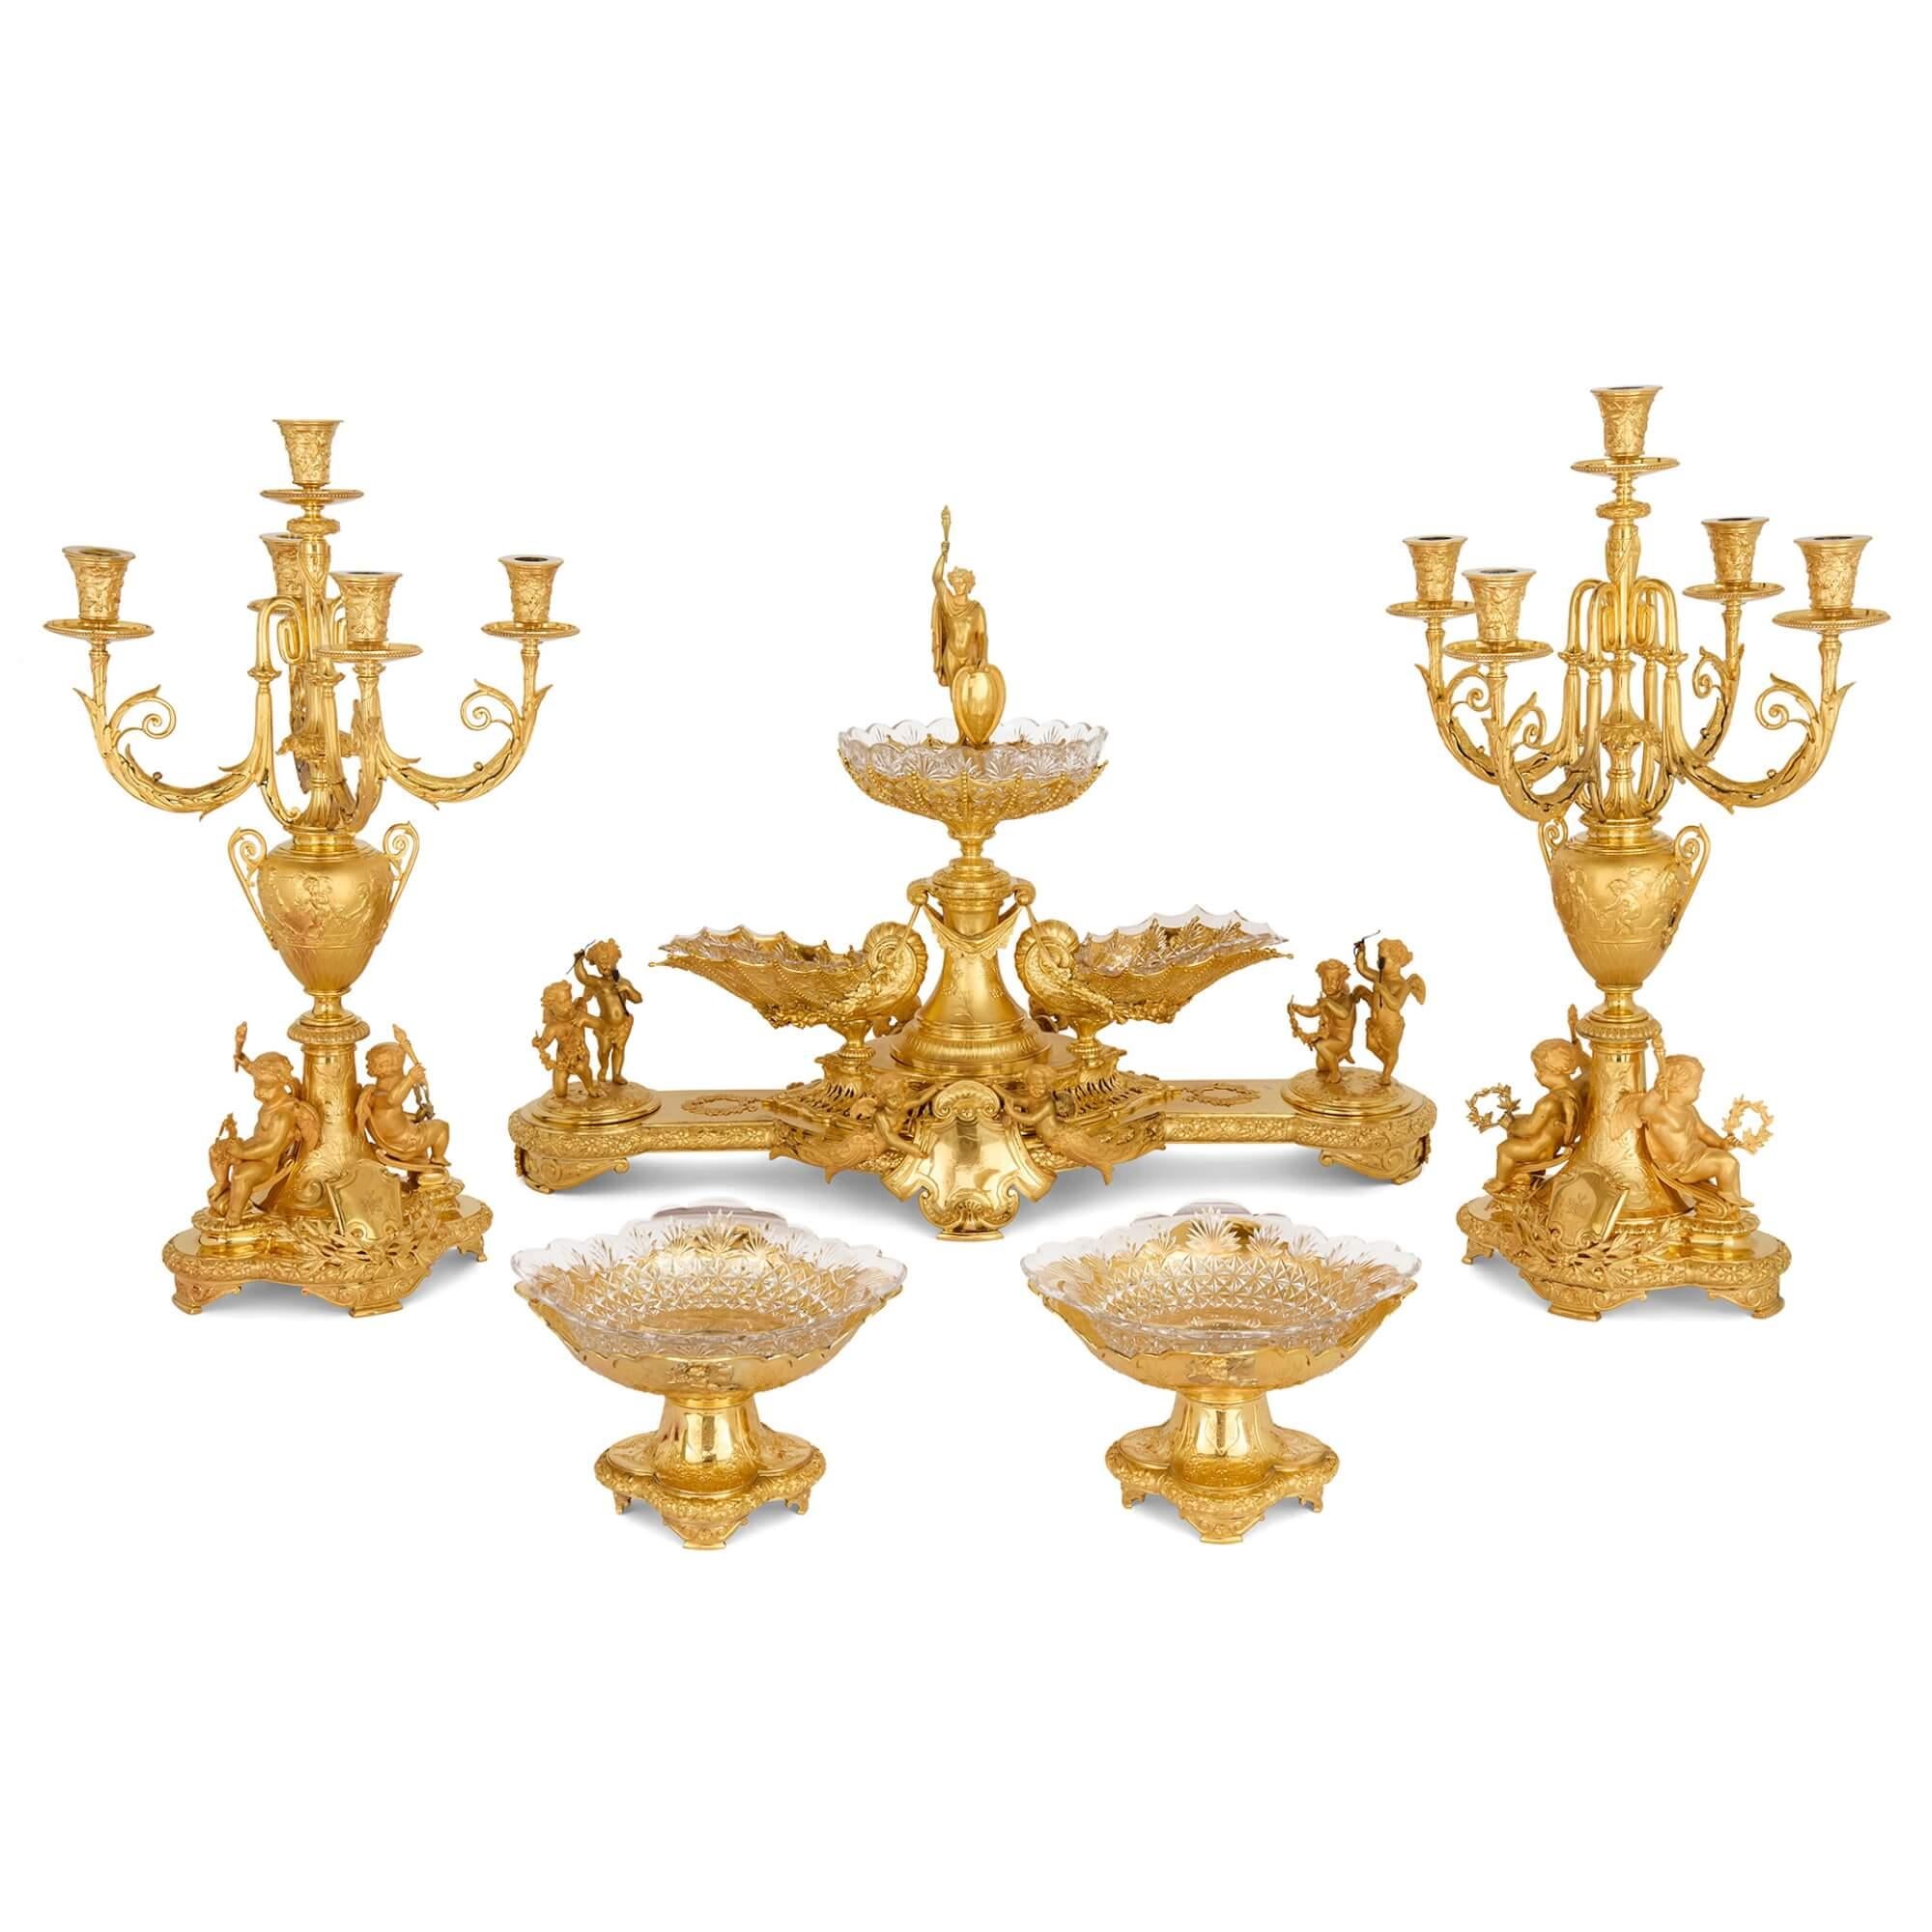 Gilt metal centrepiece suite for the Duke of Sparta by Elkington & Co.
English, Late 19th Century 
Centrepiece: Height 58cm, width 81cm, depth 35cm
Candelabra: Height 66cm, diameter 40cm

Crafted in the late 19th century as a wedding gift for the